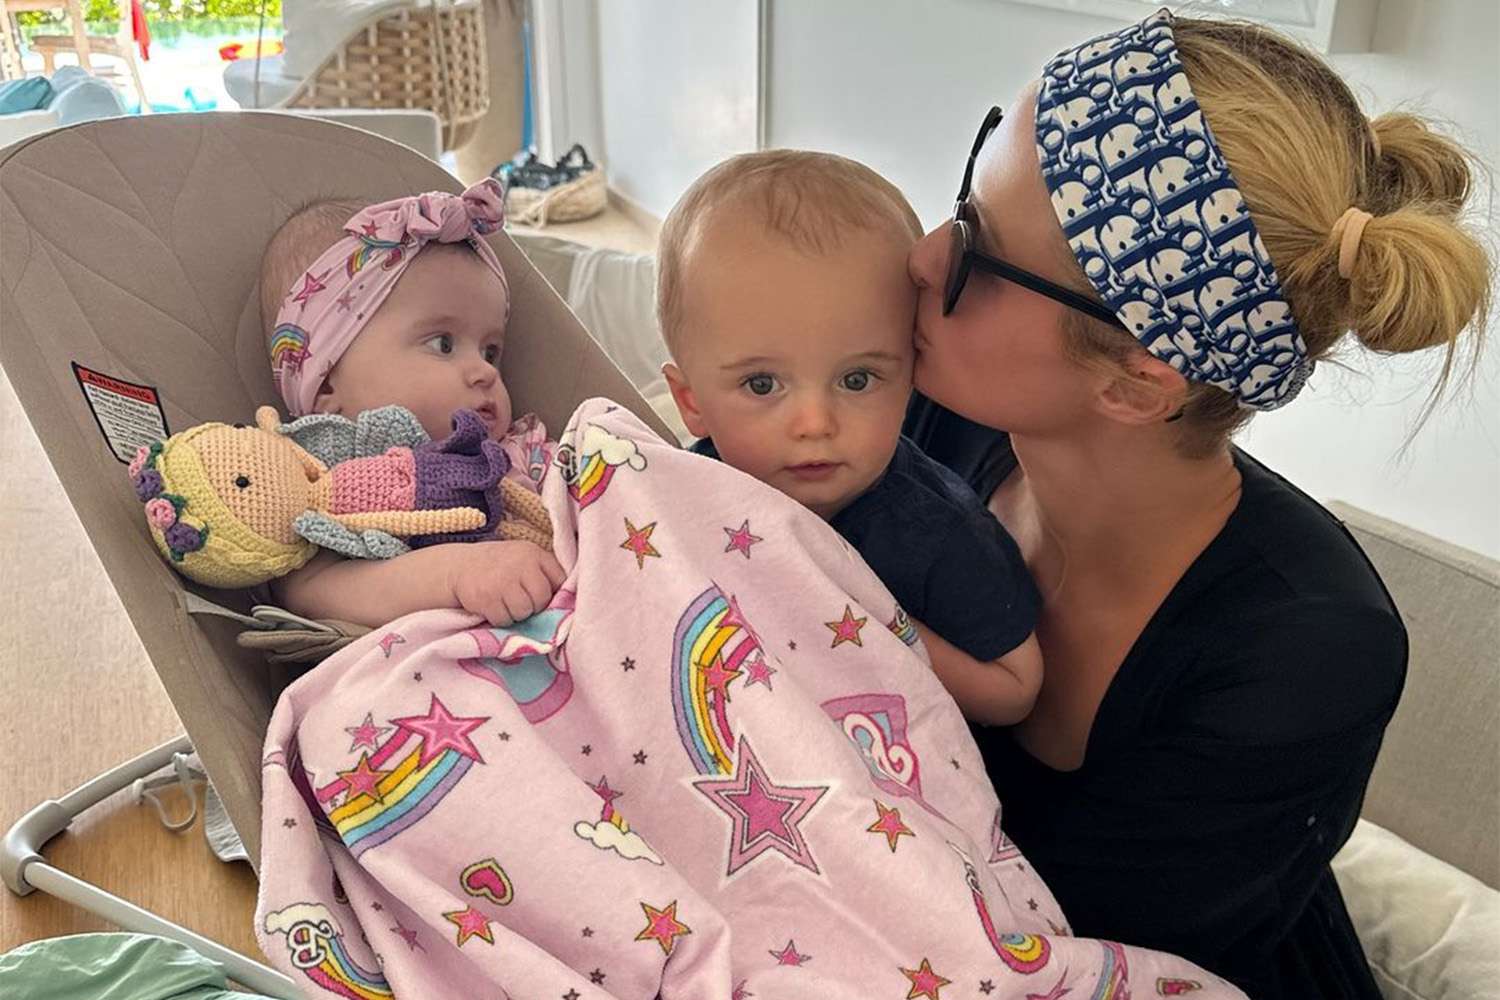 Paris Hilton Shares Adorable New Photos of Her 'Cutesie Crew' as She Vacations with Kids Phoenix and London